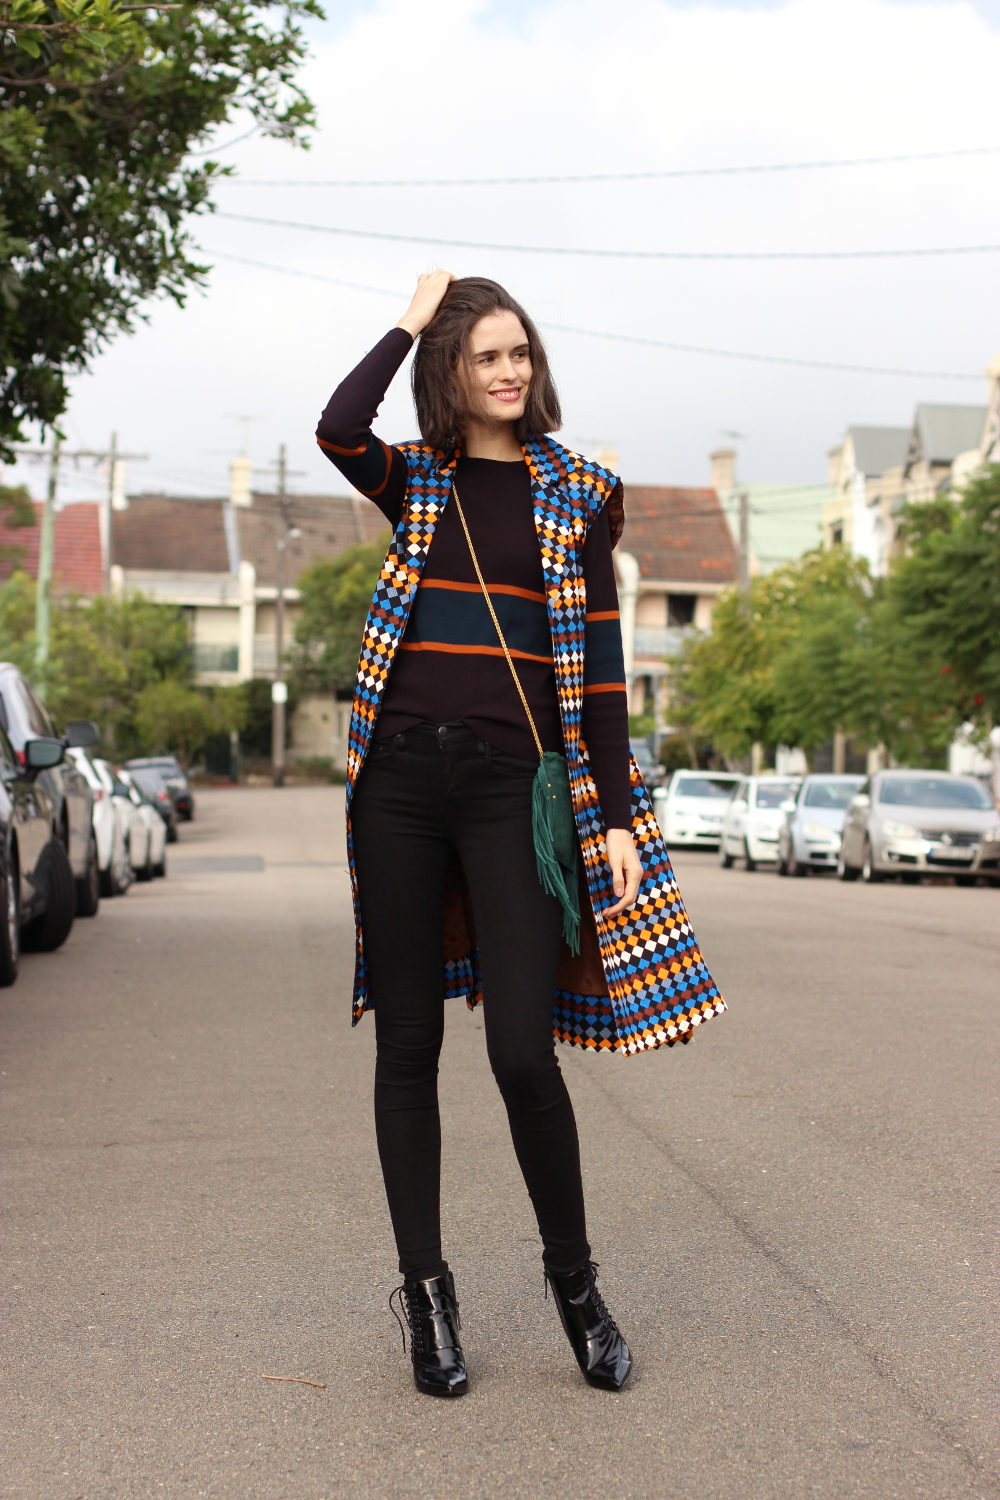 BYCHILL AUS FASHION BLOGGER | Easton Pearson sleeveless vest, Cue clothing stripe jumper, Nobody denim power black jeans, Jerome Dreyfuss fringed bag and Senso lace up boots